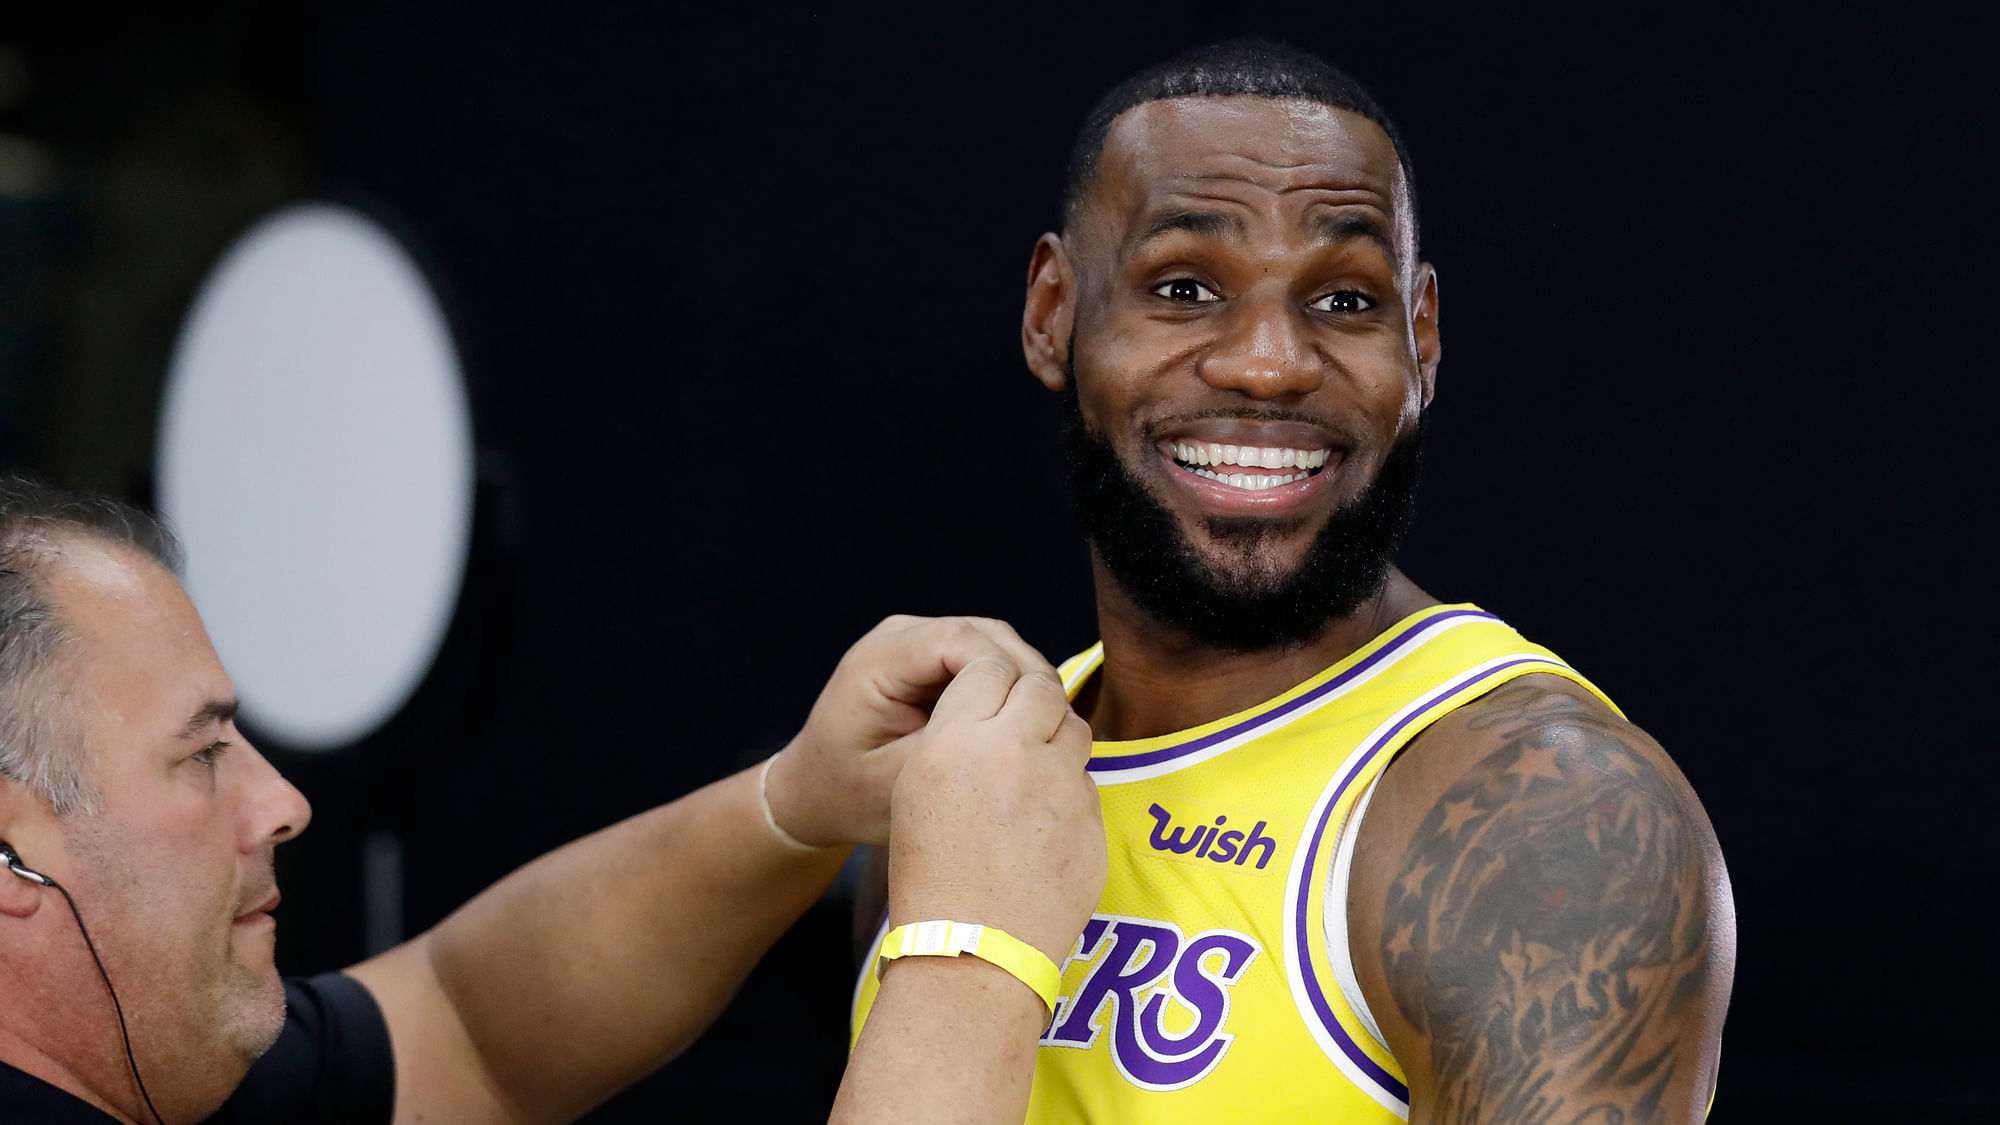 LeBron James returns from injury to play for the Los Angeles Lakers against the Clippers.